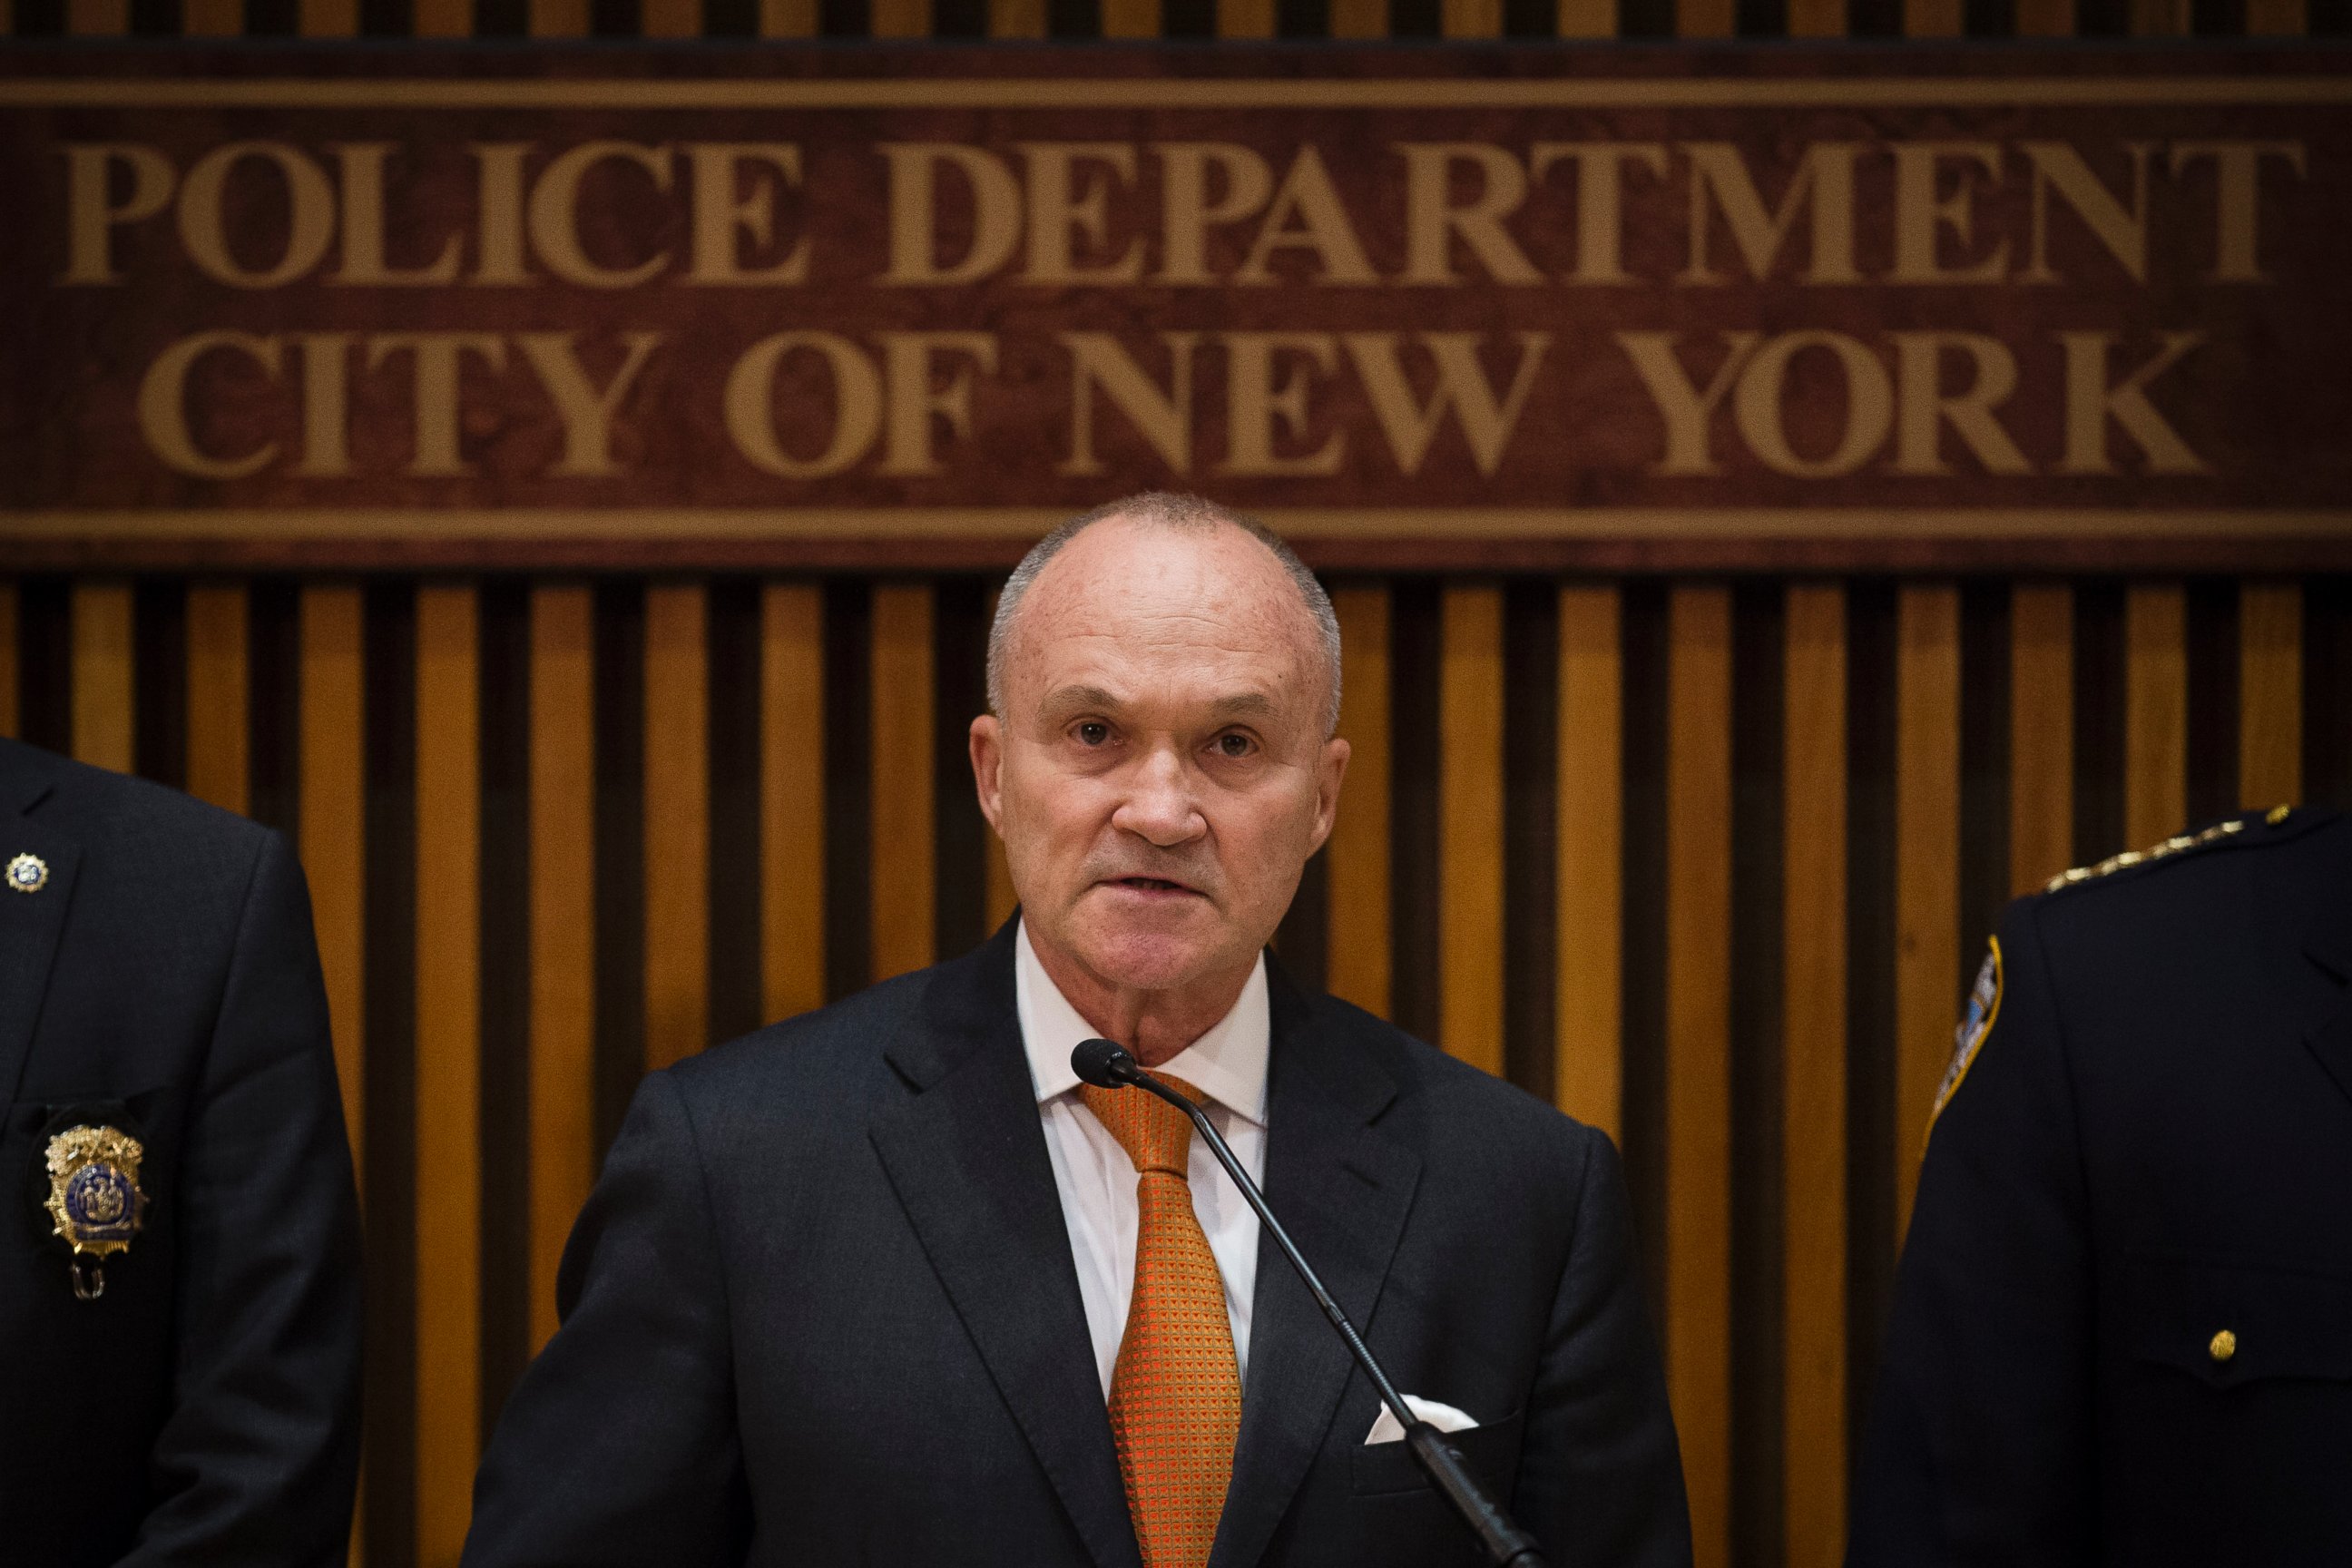 PHOTO: Former NYPD Commissioner Ray Kelly shown in a  October 2013 file picture.